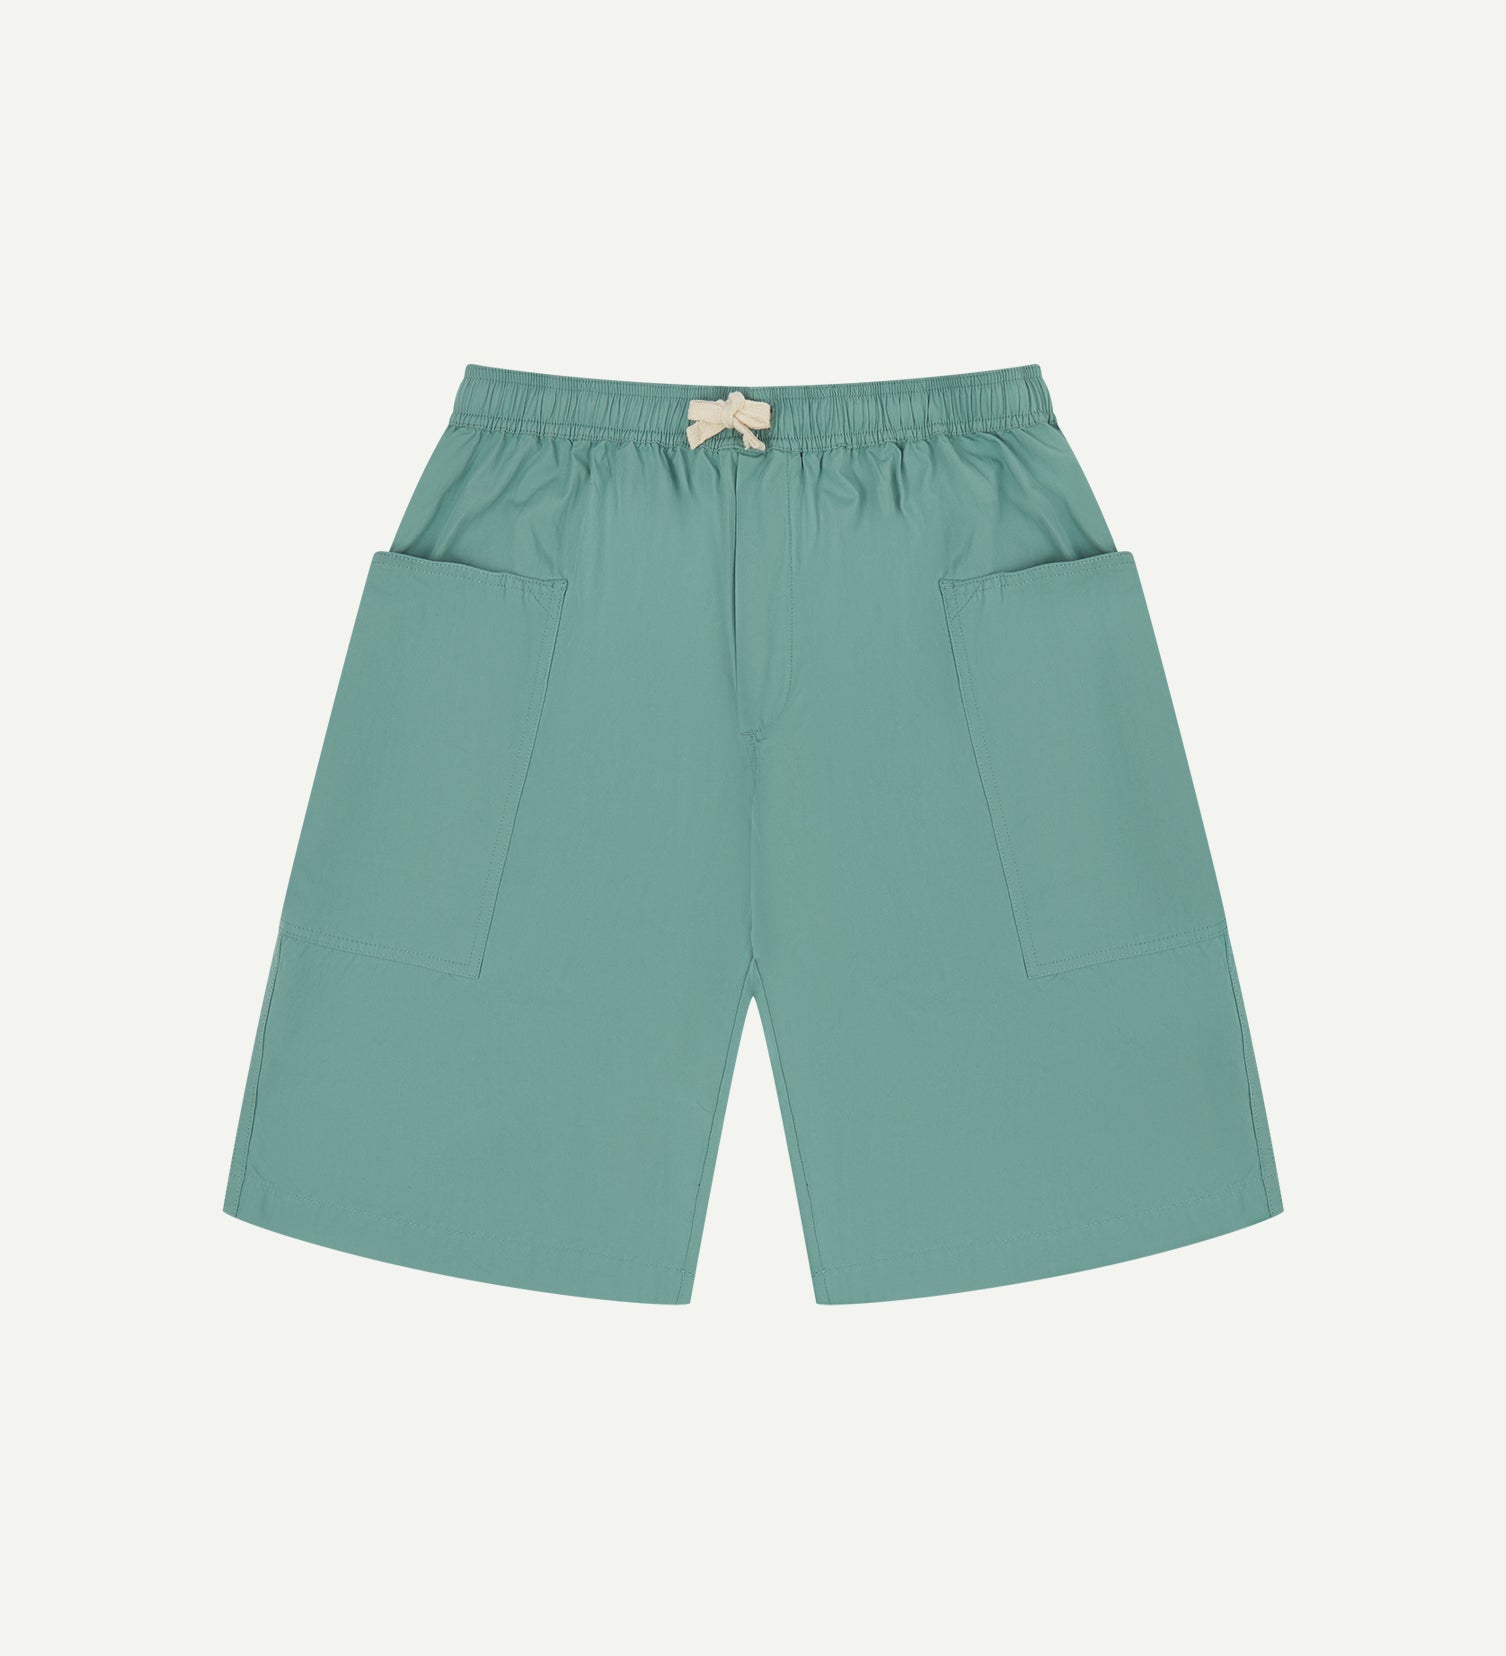 Front view of eucalyptus green organic cotton #5015 lightweight cotton shorts by Uskees. Clear view of elasticated waist and deep front pockets.